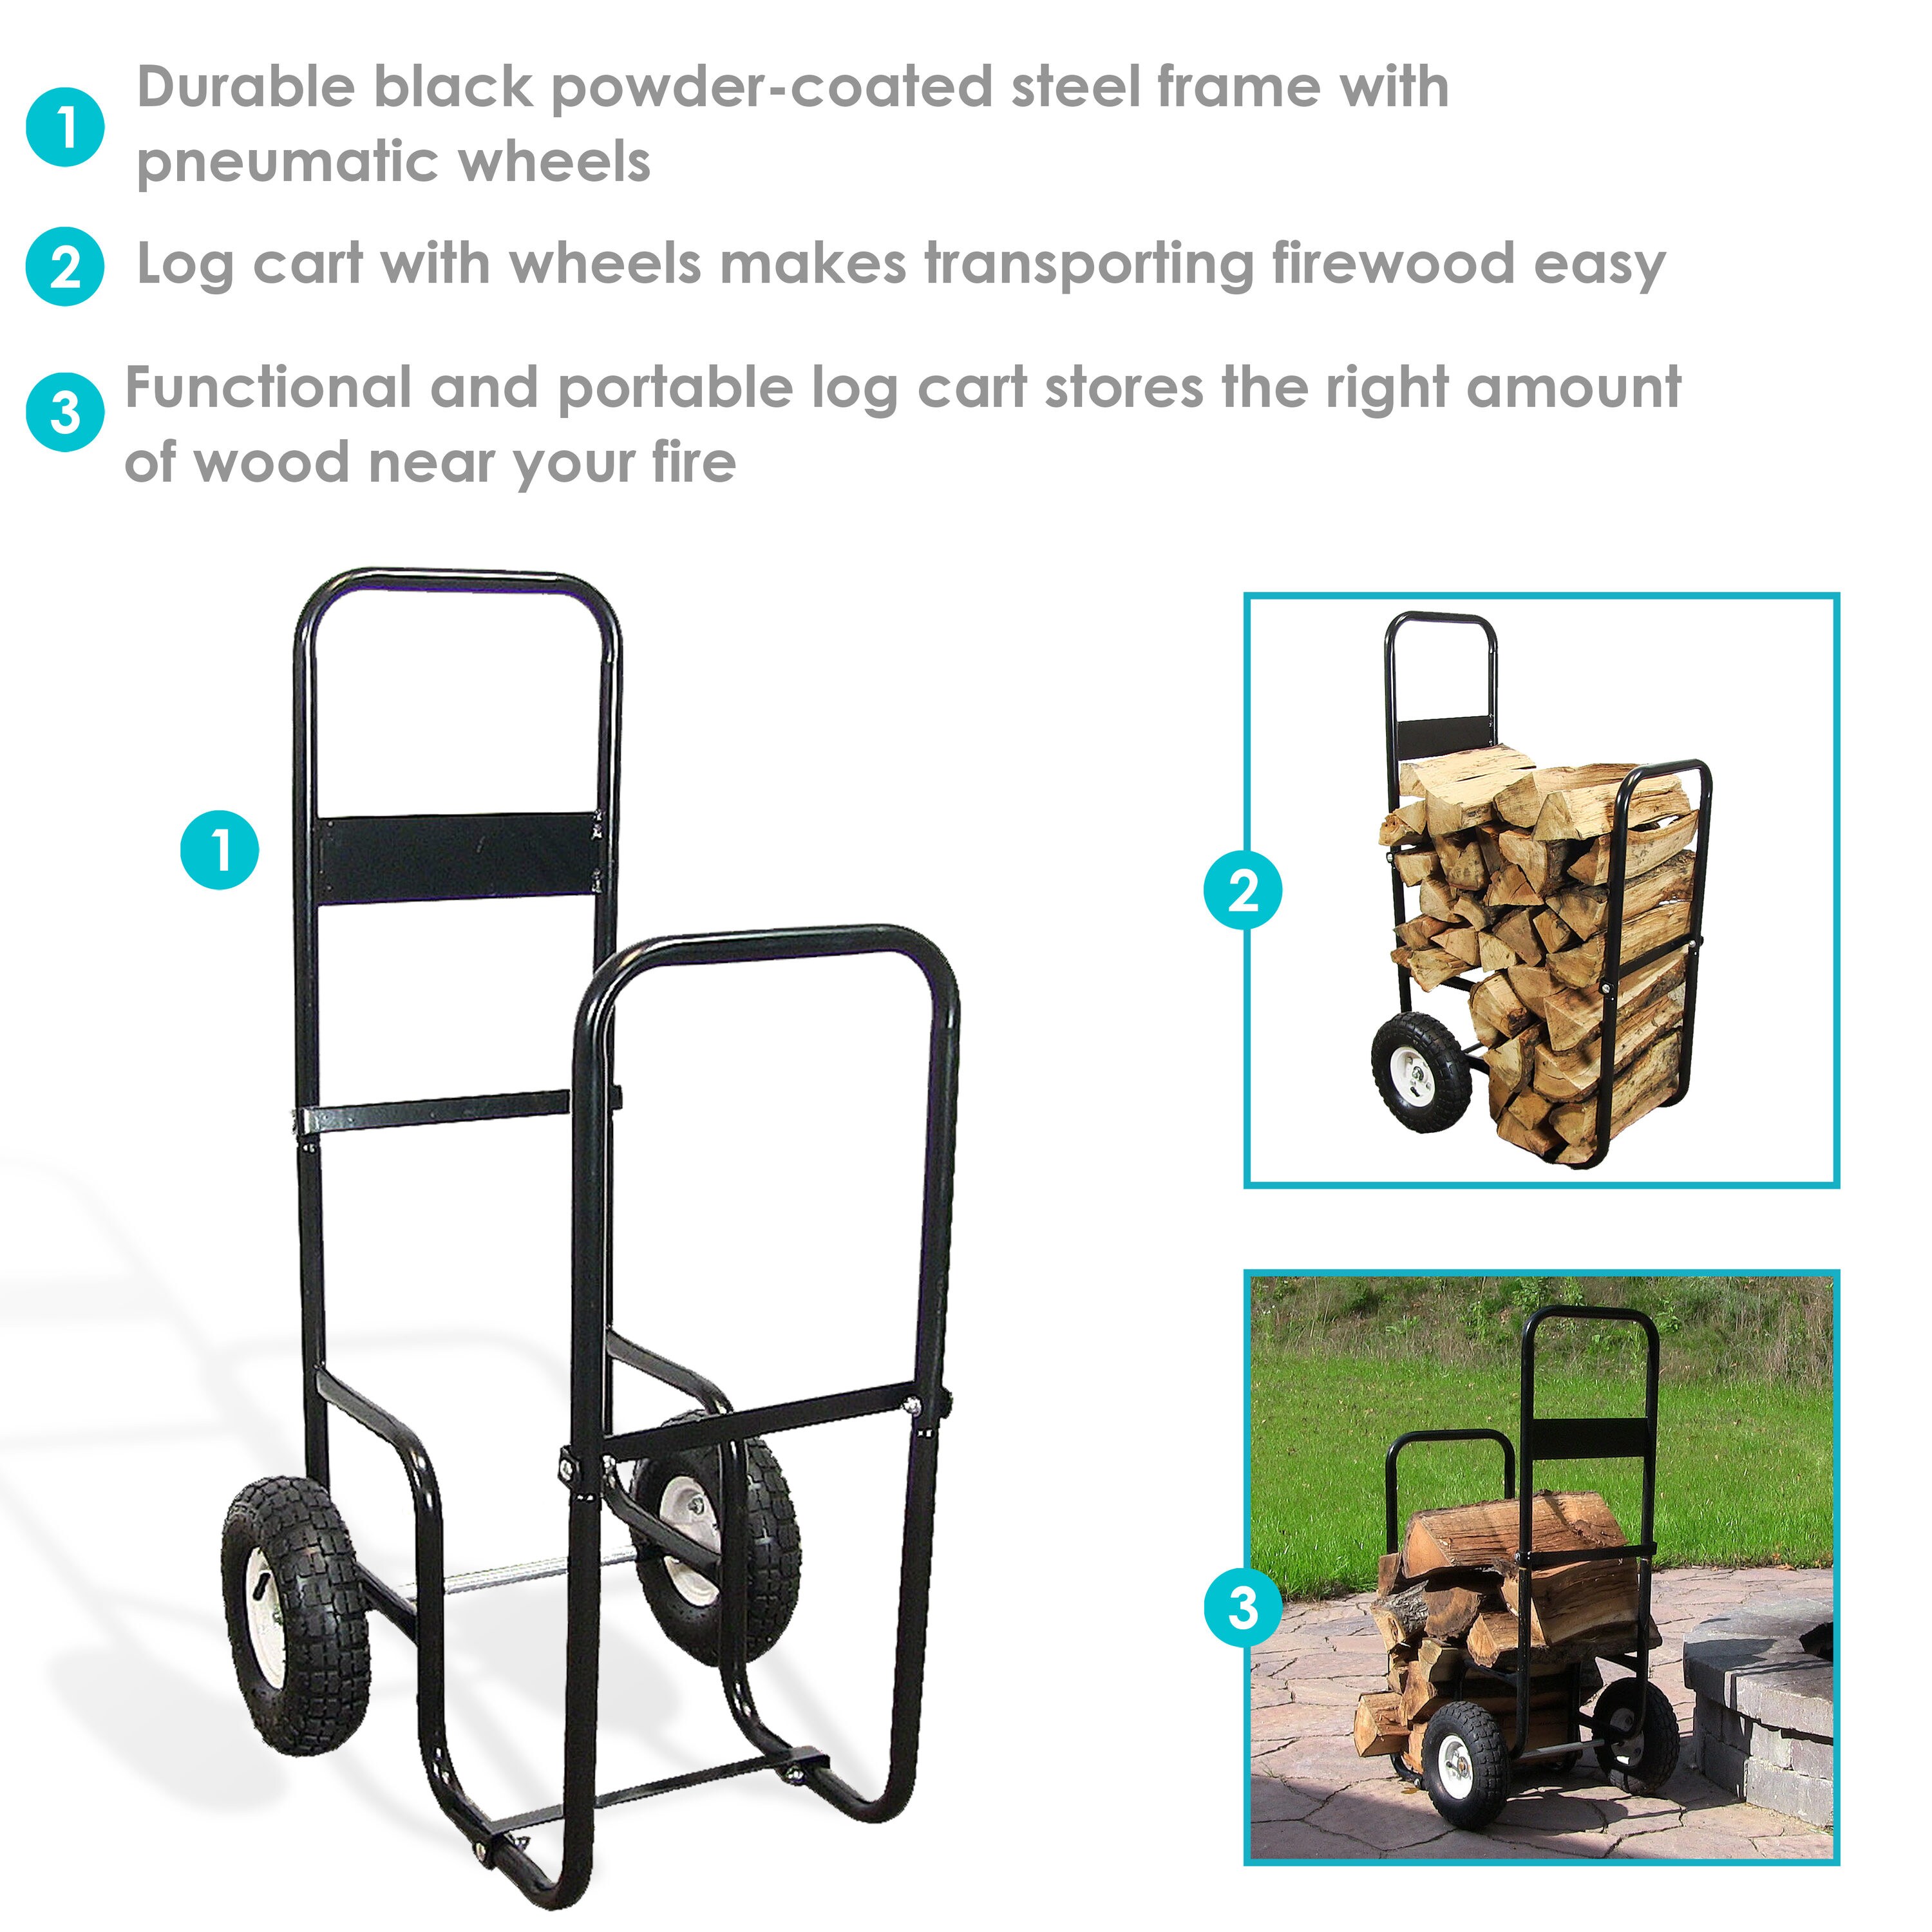 Outdoor Wood Rack Storage Mover Sunnydaze Firewood Log Cart Carrier with Heavy Duty Waterproof Cover COMBO Rolling Dolly Hauler 